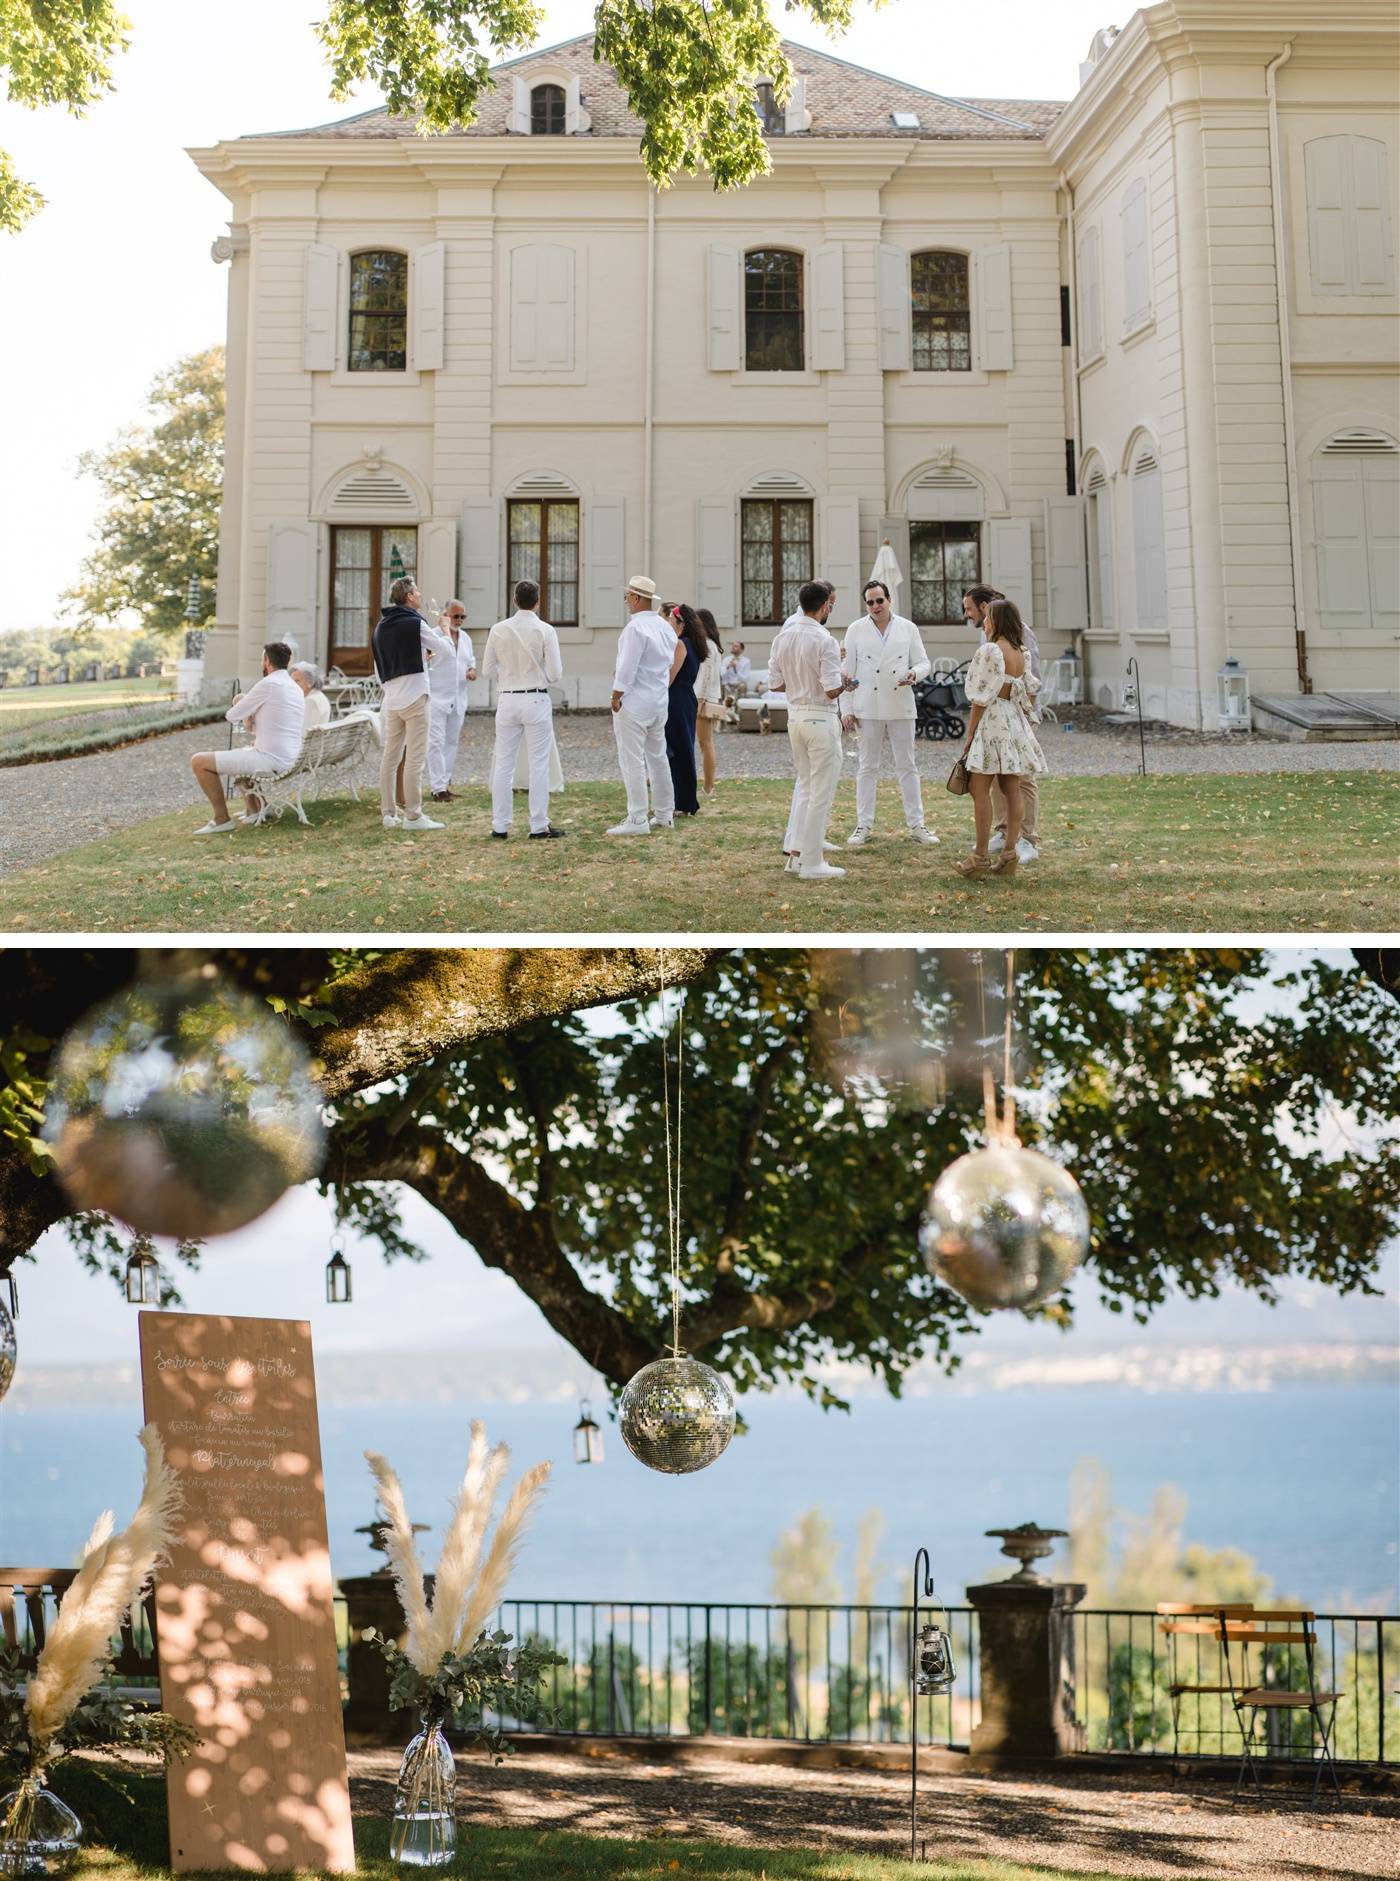 Birthday party at a private estate on Lake Geneva